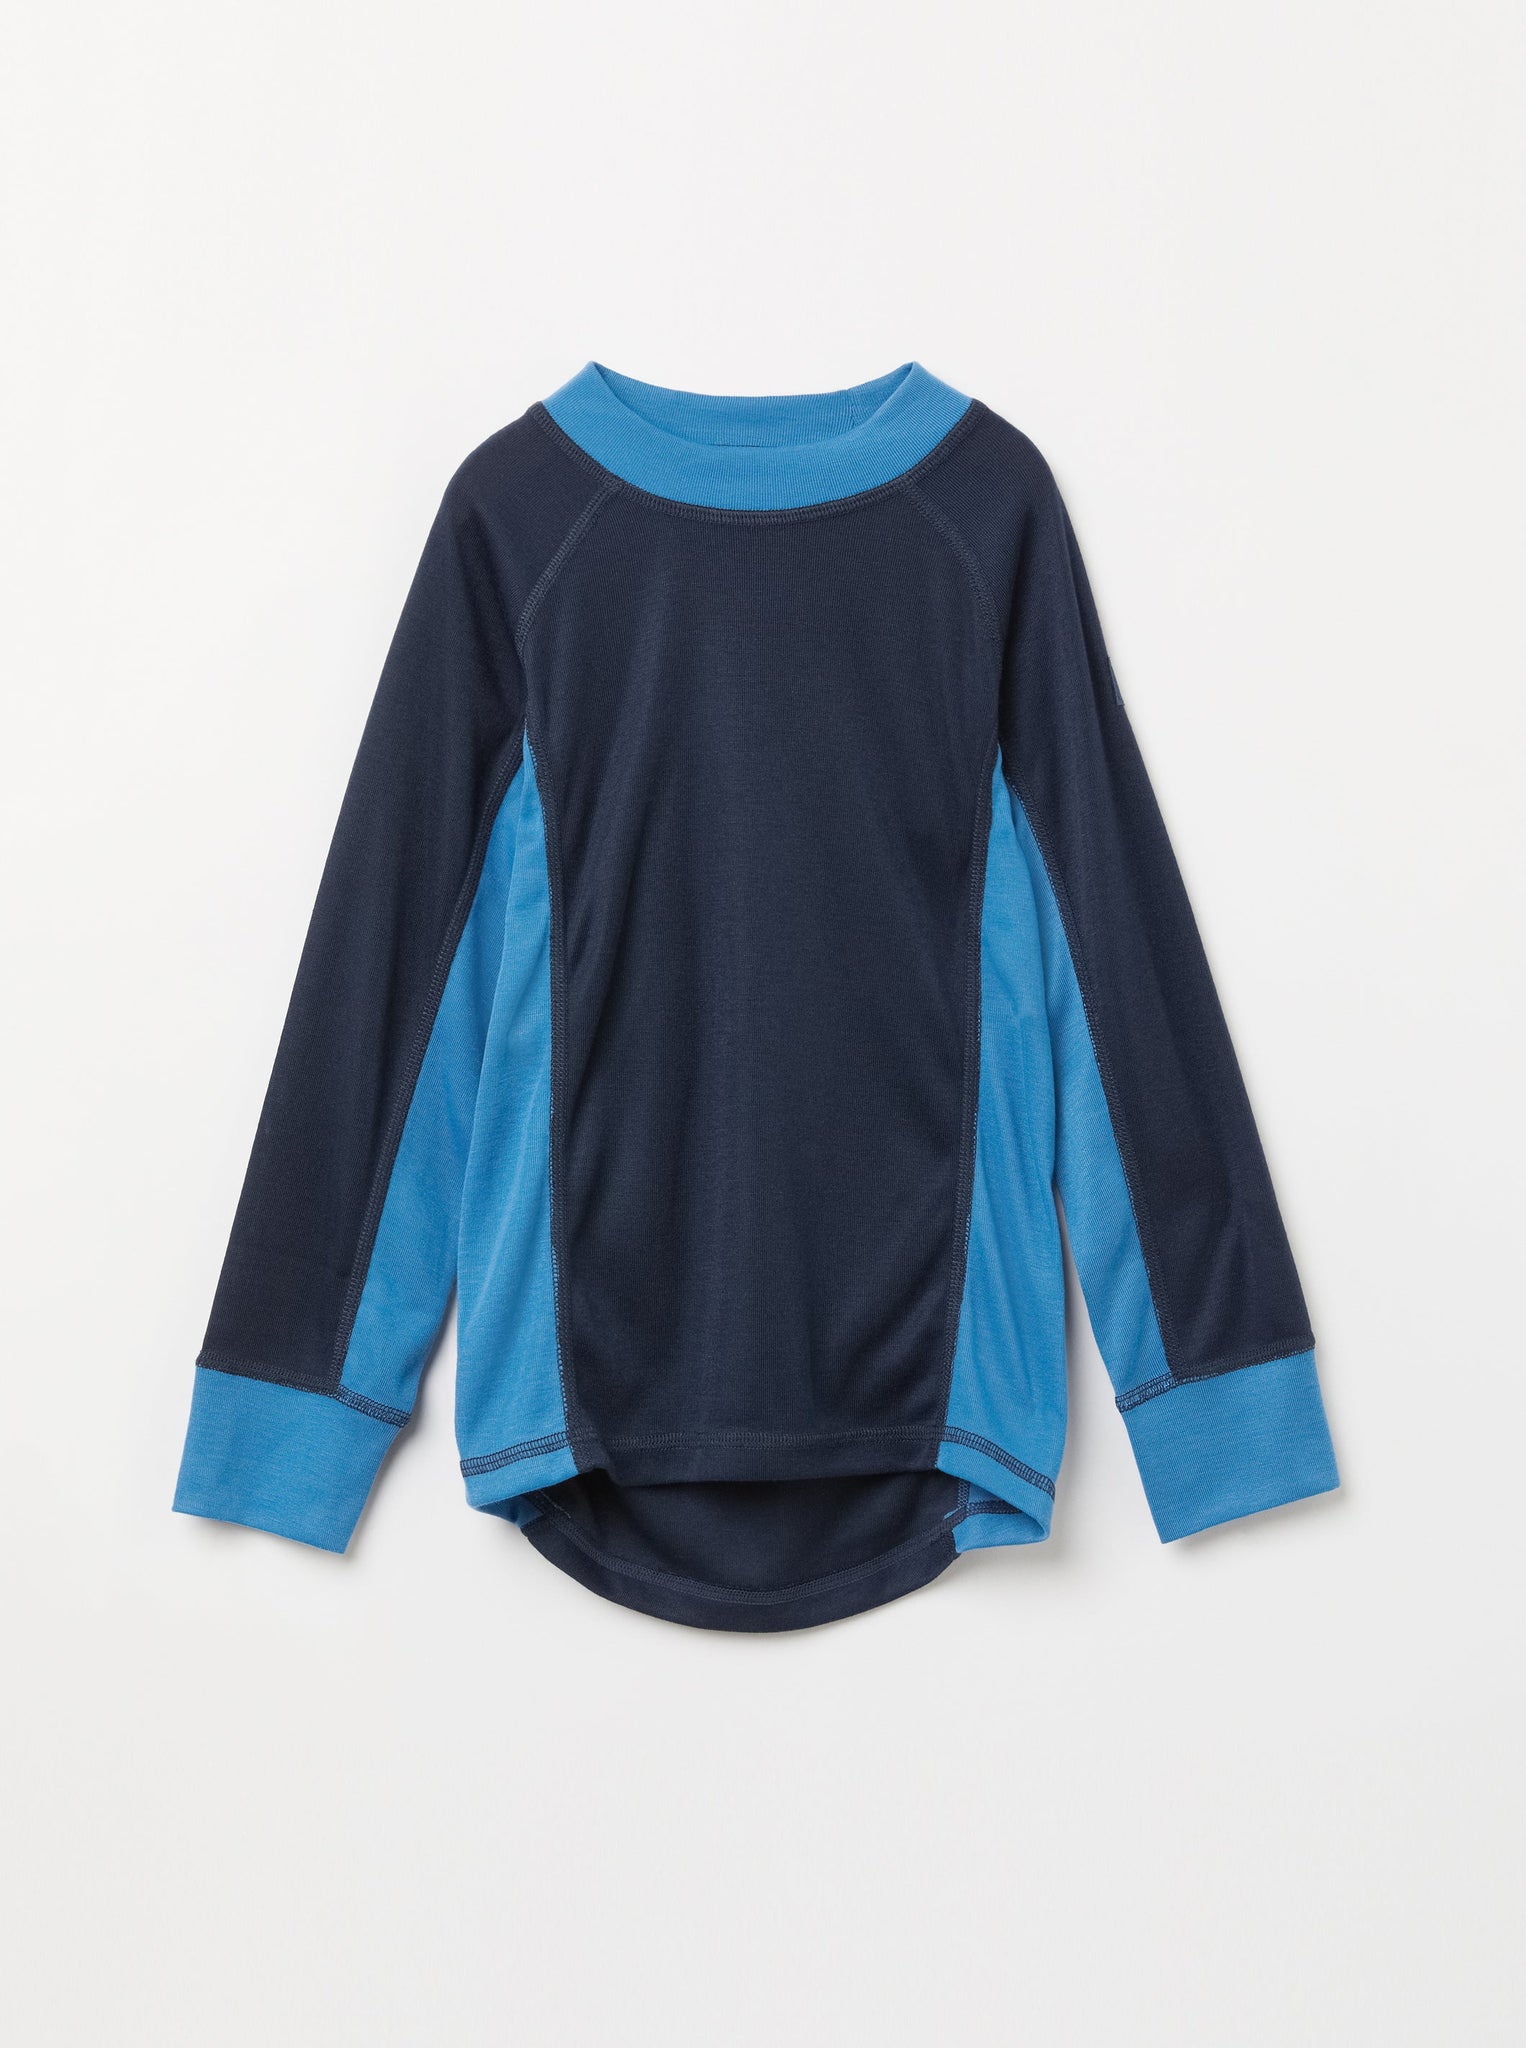 Navy Kids Thermal Top from the Polarn O. Pyret kidswear collection. Made from sustainable sources.